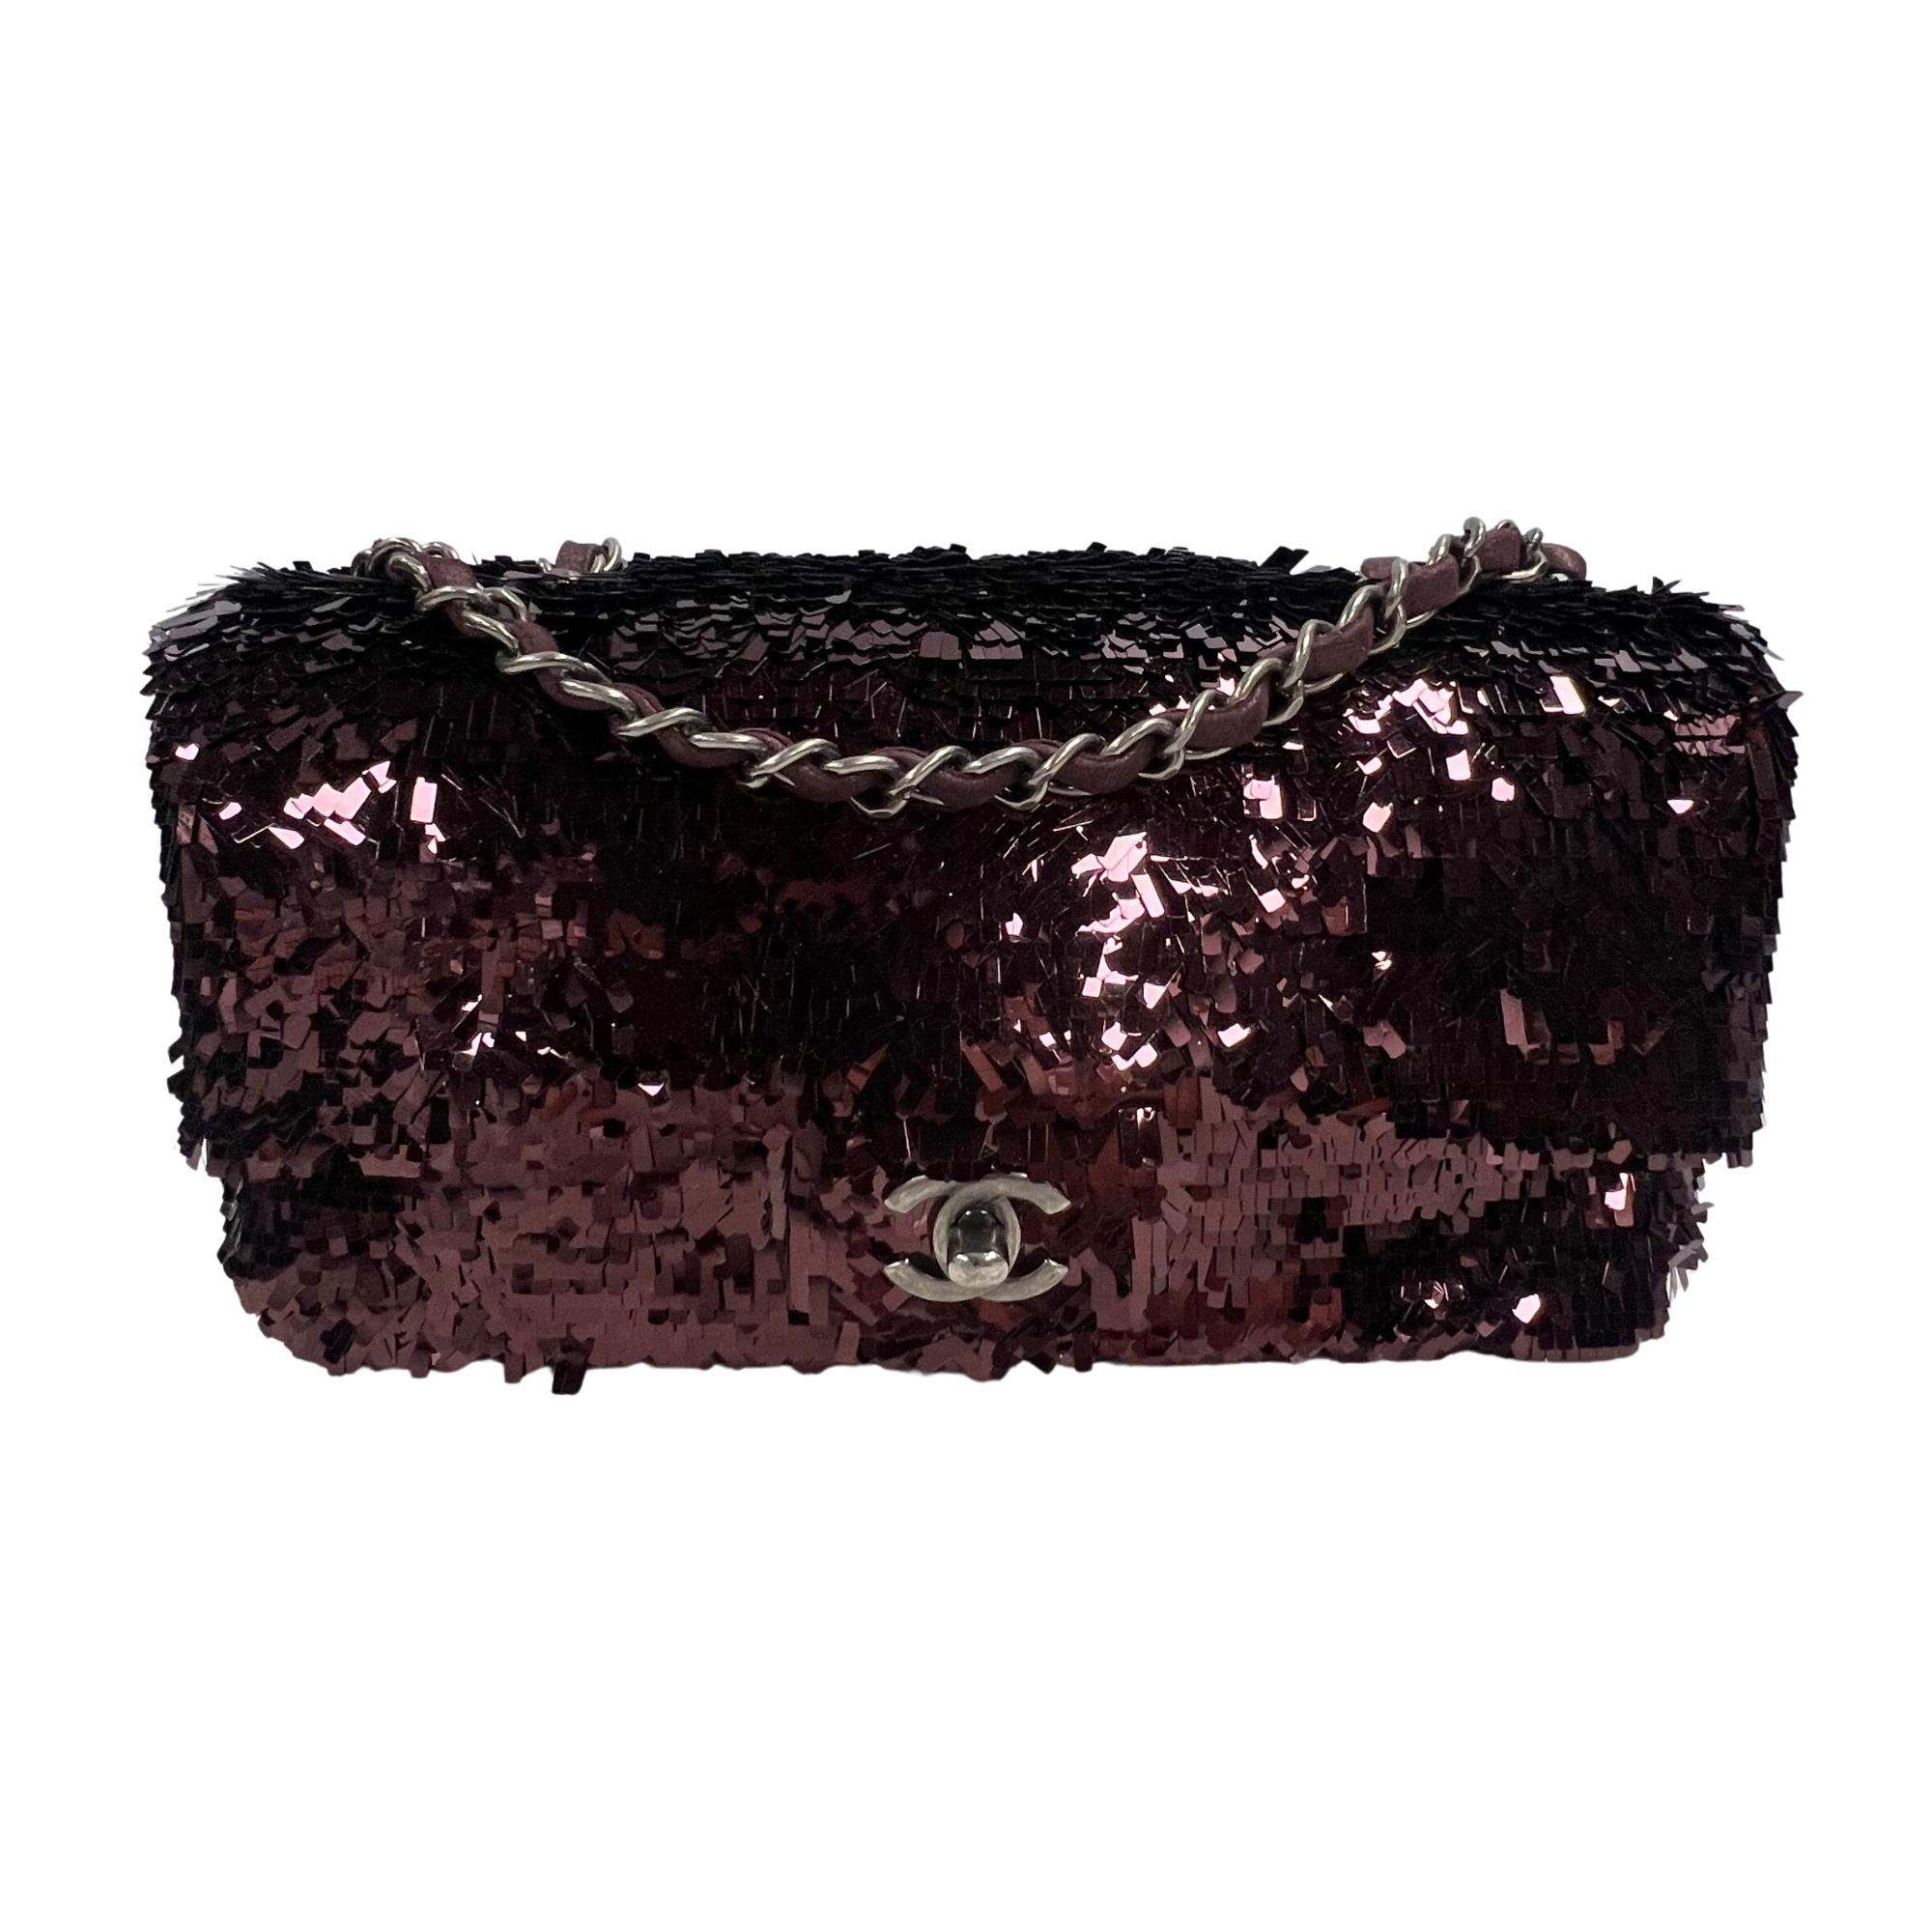 Chanel sequinned Timeless flap bag in dark burgundy form 2014. The bag features an exterior of long sequins throughout, ruthenium metal hard, a long chain and leather shoulder strap, a front flap with CC turn lock closure and is finished with a